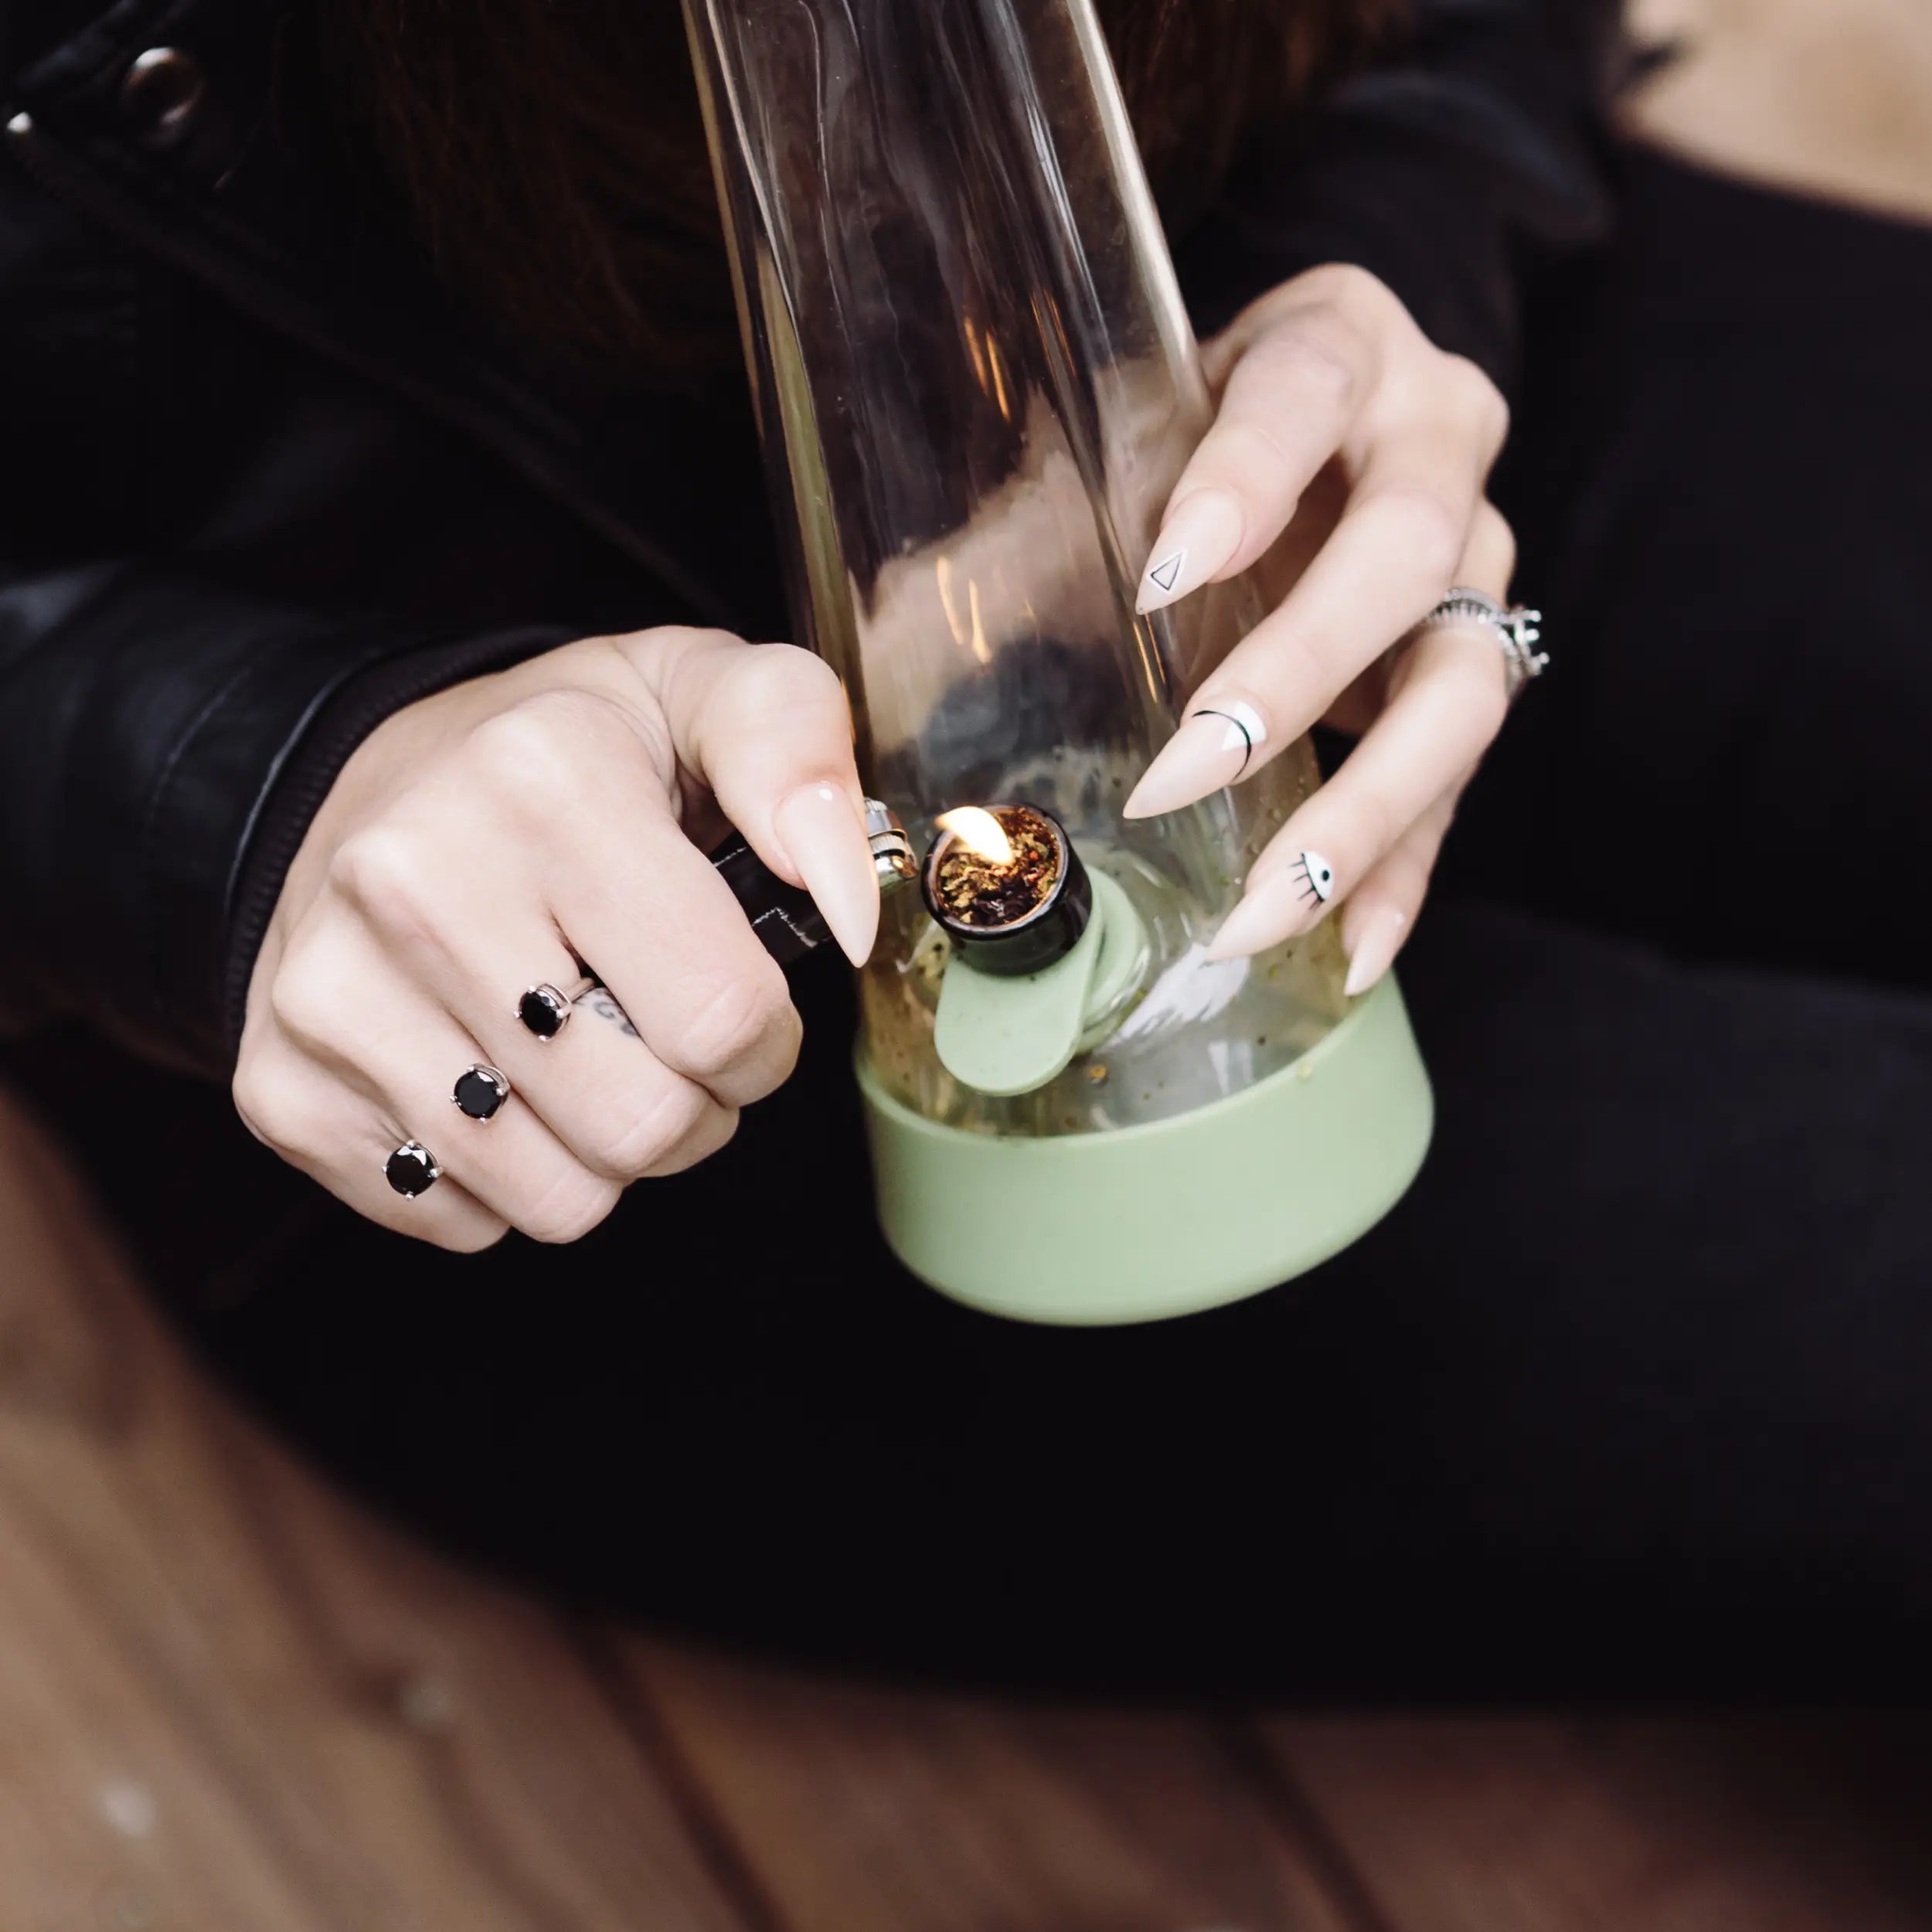 Session's Celery Green Bong: The Perfect Companion for Laid-Back Vibes.